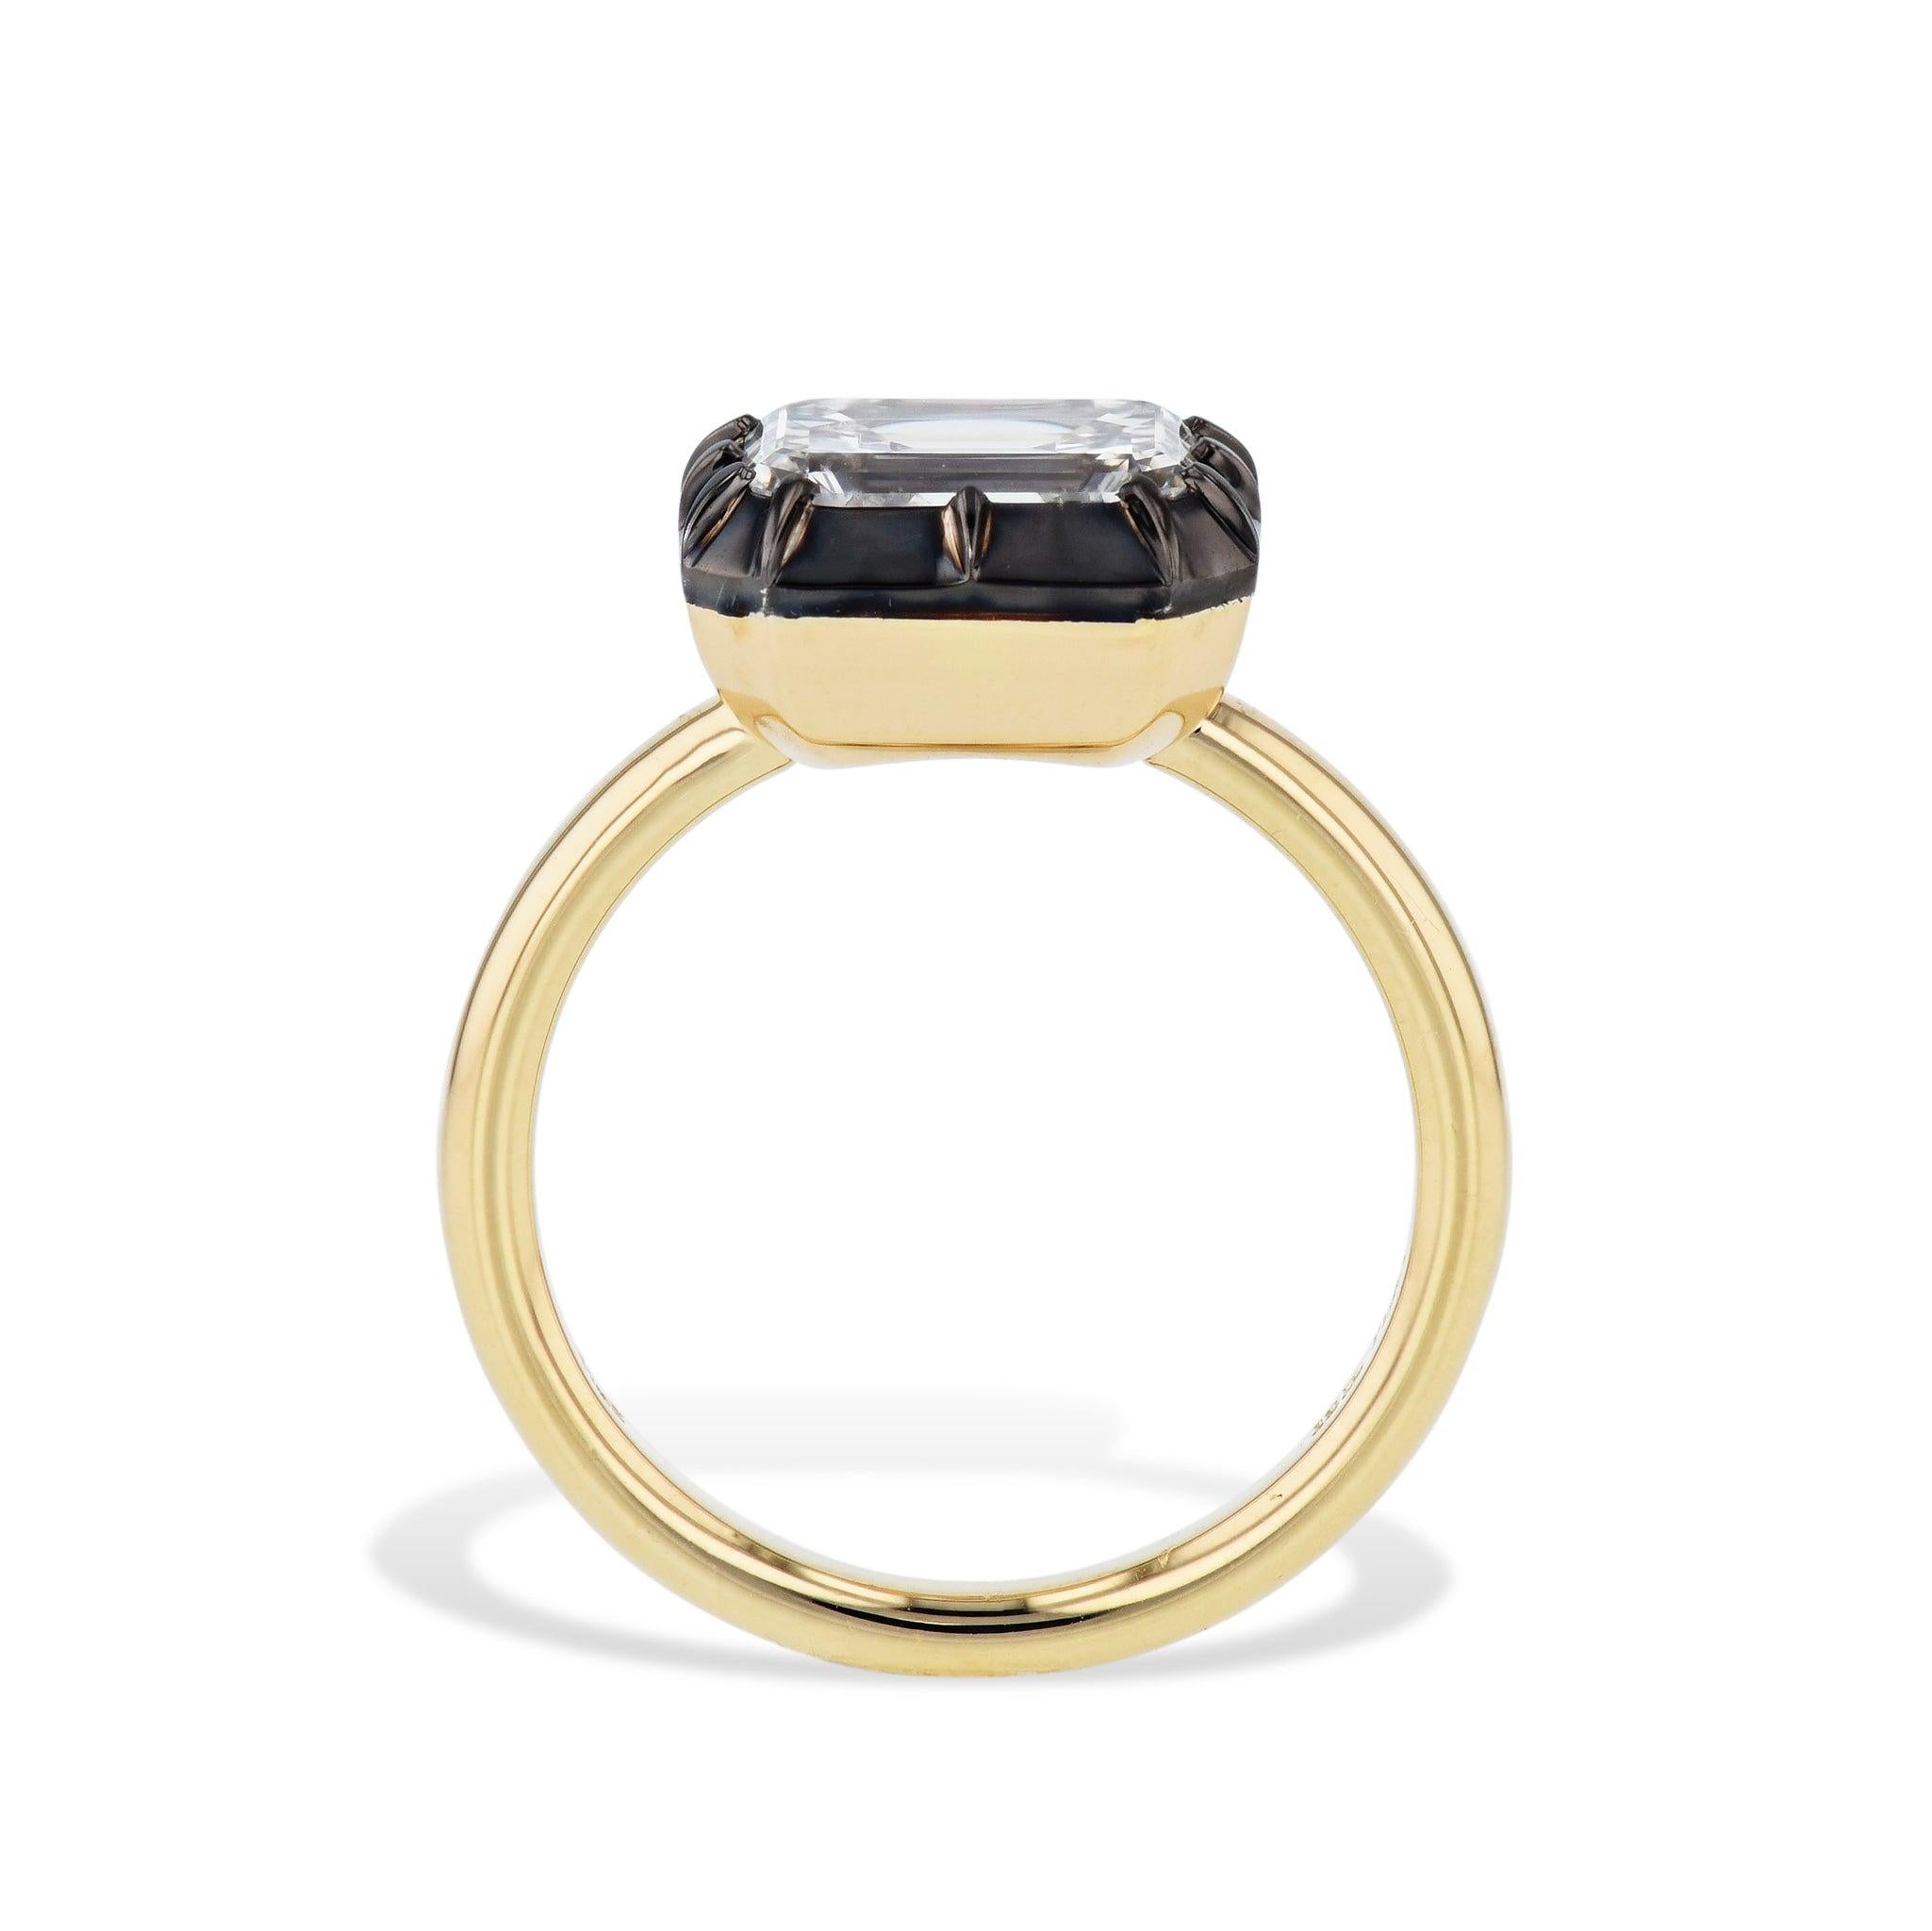 This exquisite ring features a stunning emerald cut diamond set in a black ruthenium bezel, with platinum prongs and 18kt yellow gold shank. Its east-west mounted diamond adds a touch of uniqueness to its handmade design. Available in a size 6, it's